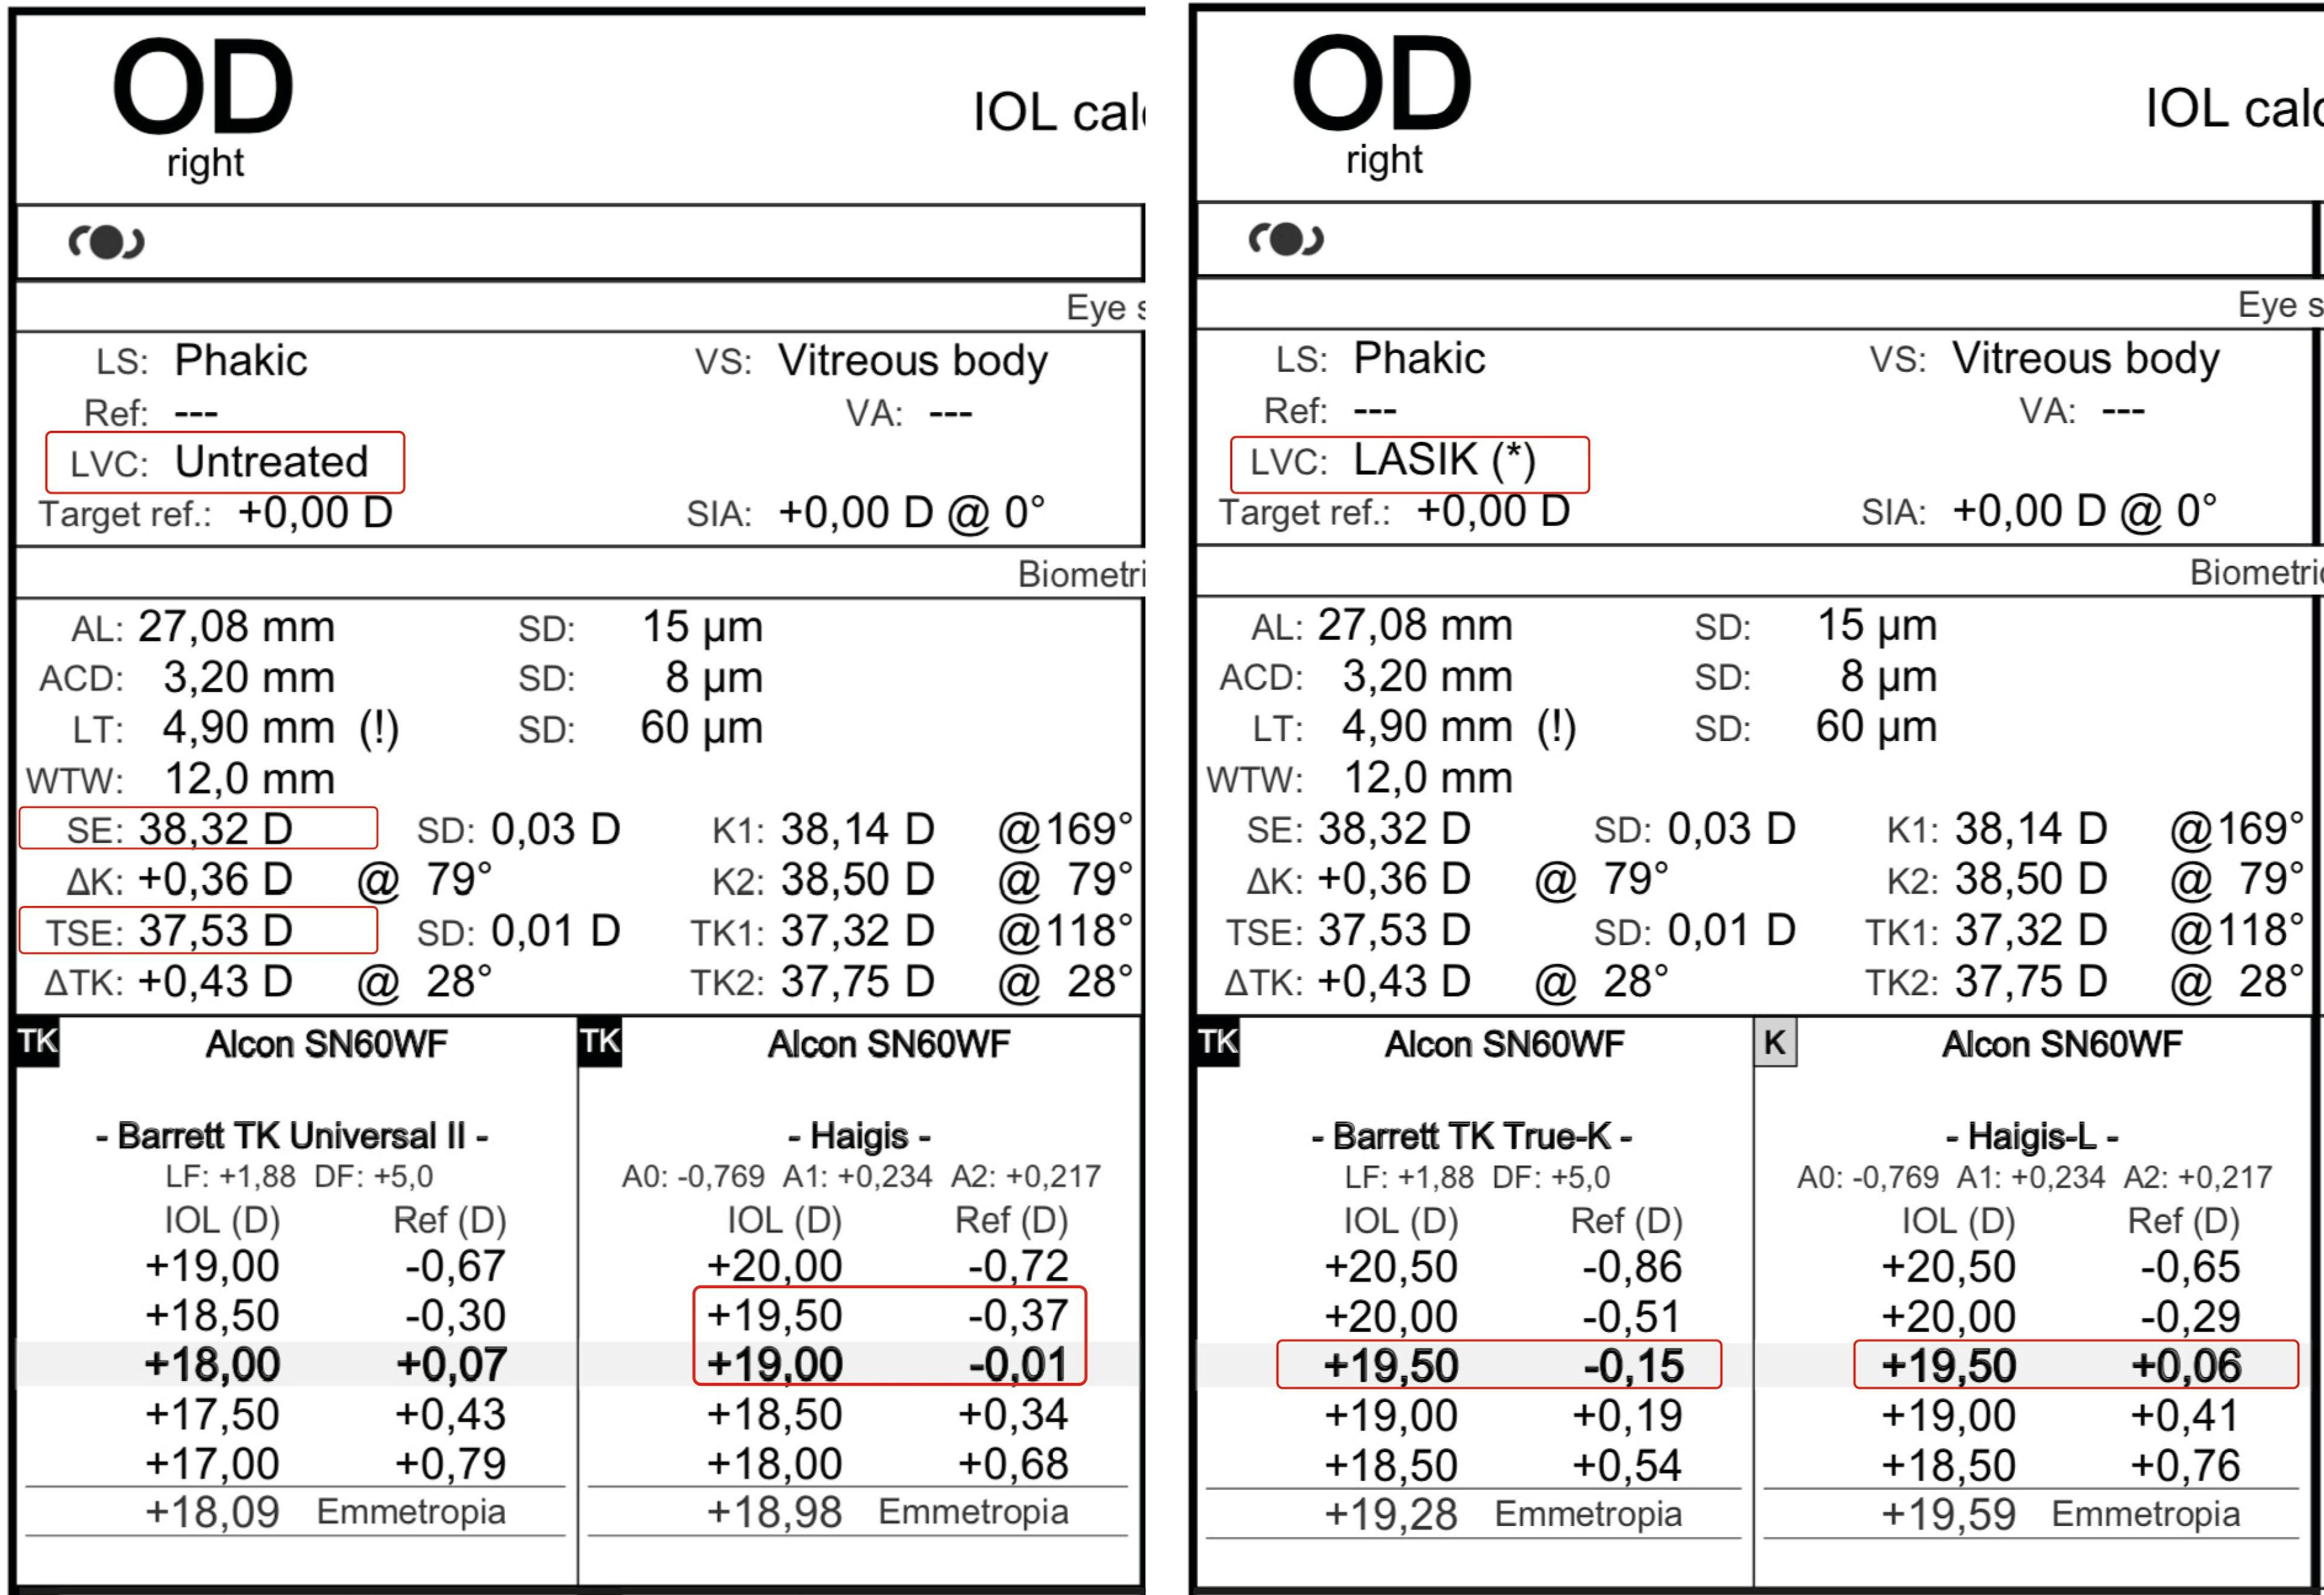 Figure 5 is an example of a post-LASIK patient who underwent cataract surgery and received a 19.5 D IOL with a postoperative refraction of0.25 D and a prediction error of0.12 D according to the combination of TK and Haigis formula. Panel (A) shows the IOLMaster 700 report for the eye using TK values (as if the patient had not previously had laser vision correction) using Haigis, and panel (B) shows the Barrett TK True K and Haigis L report where the patient was entered as a post-LASIK patient.